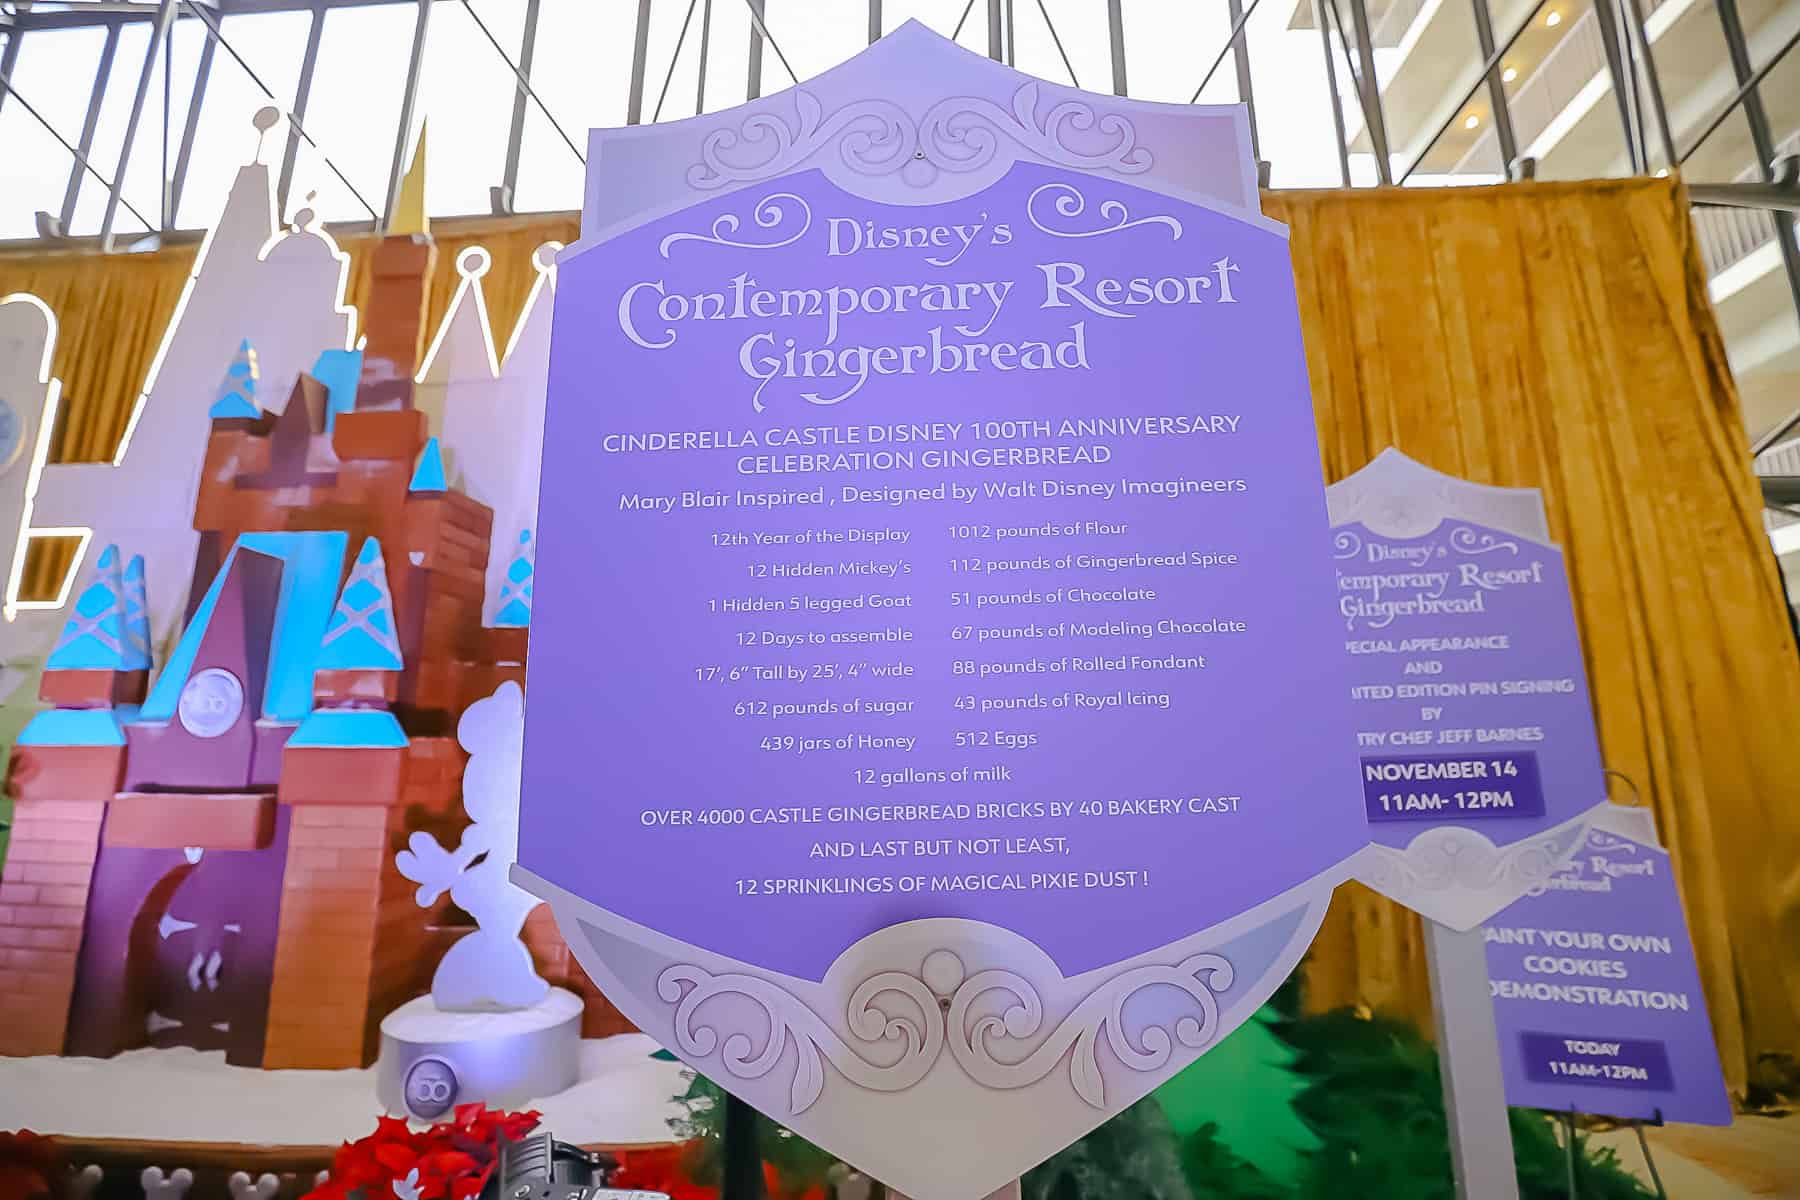 Sign lists facts about the gingerbread castle and an ingredients list. 